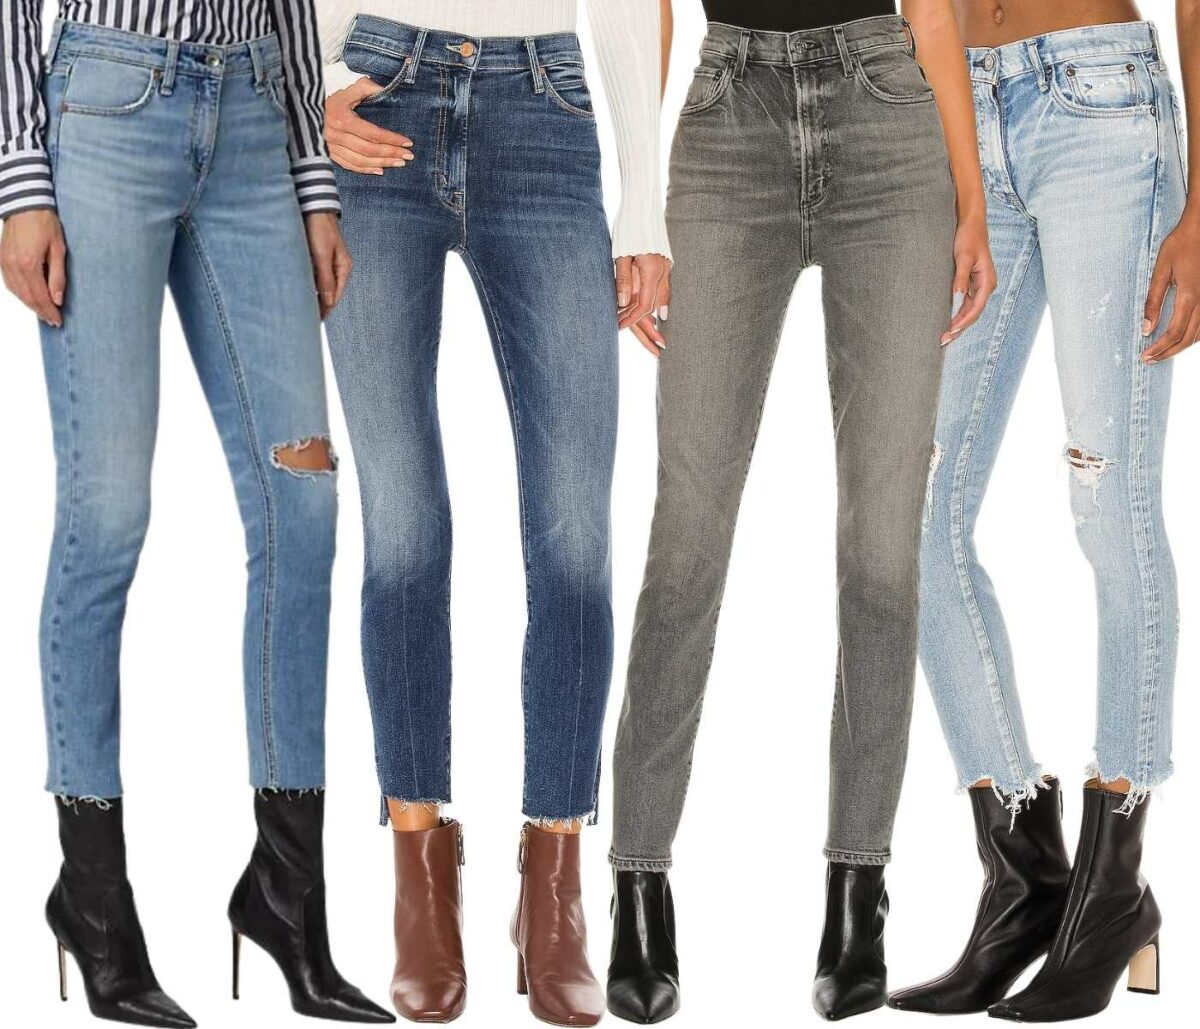 How to Wear Ankle Boots with Jeans for Women The Ultimate Guide